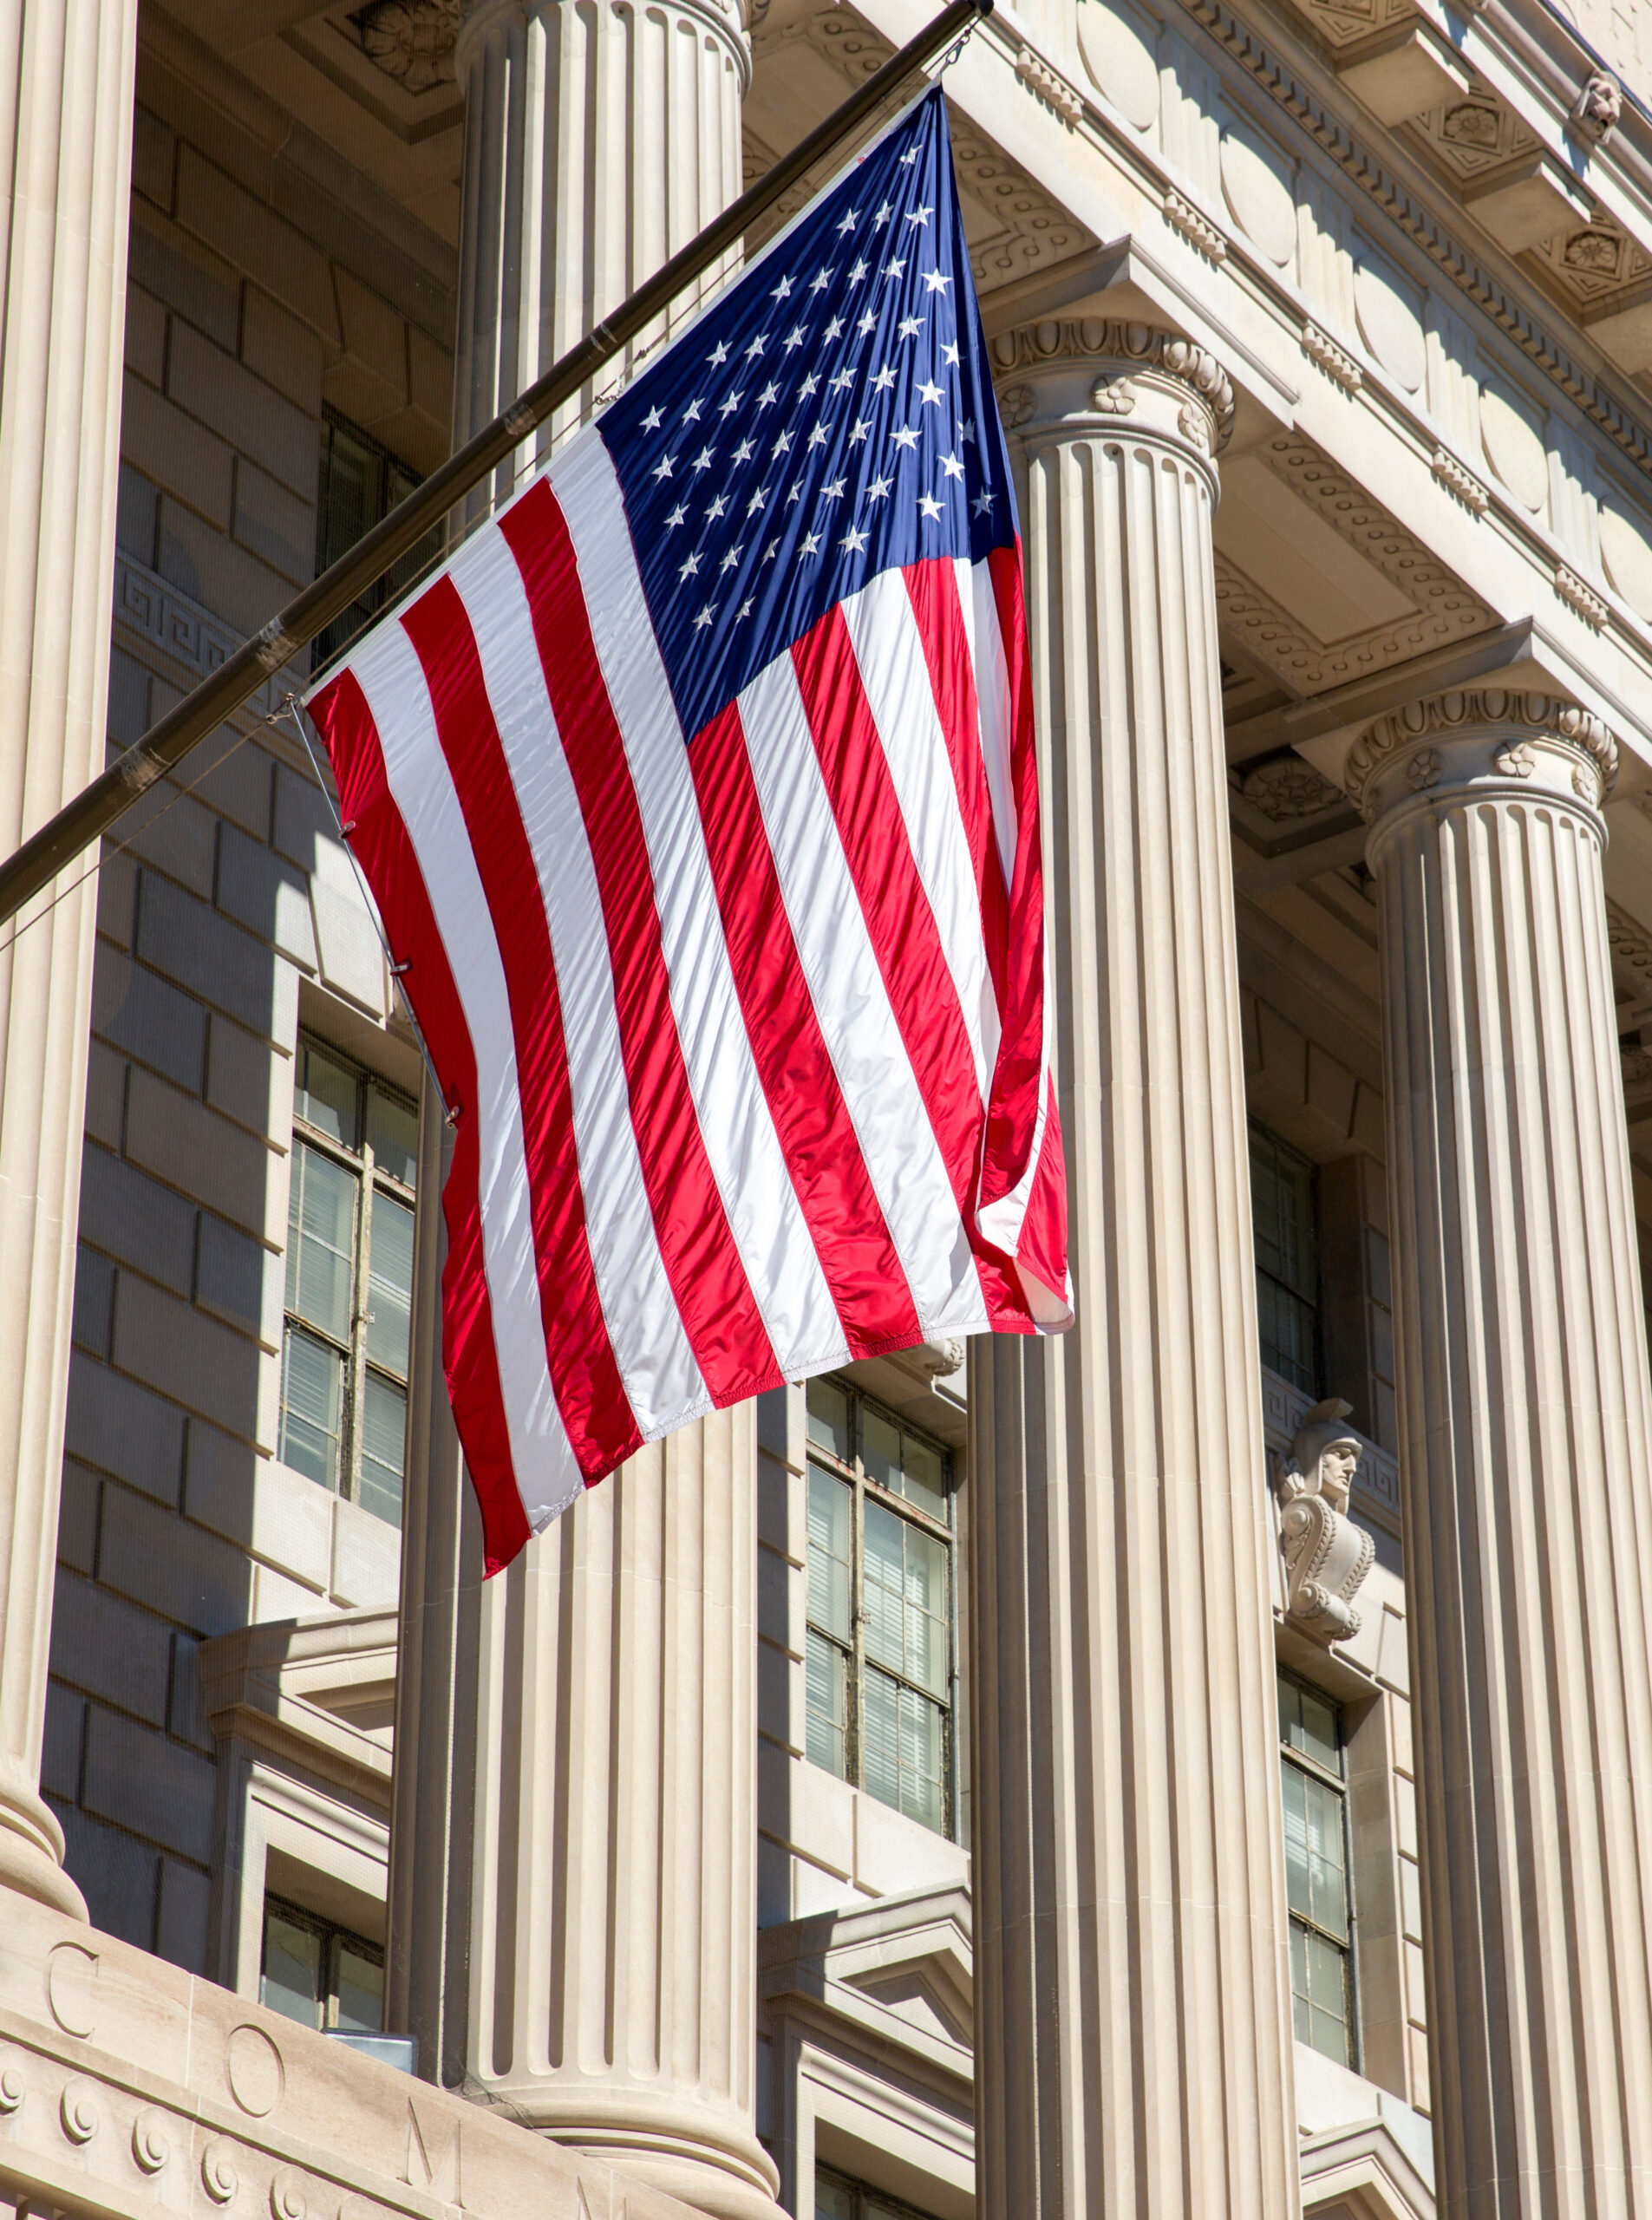 The American flag hanging outside a government building.